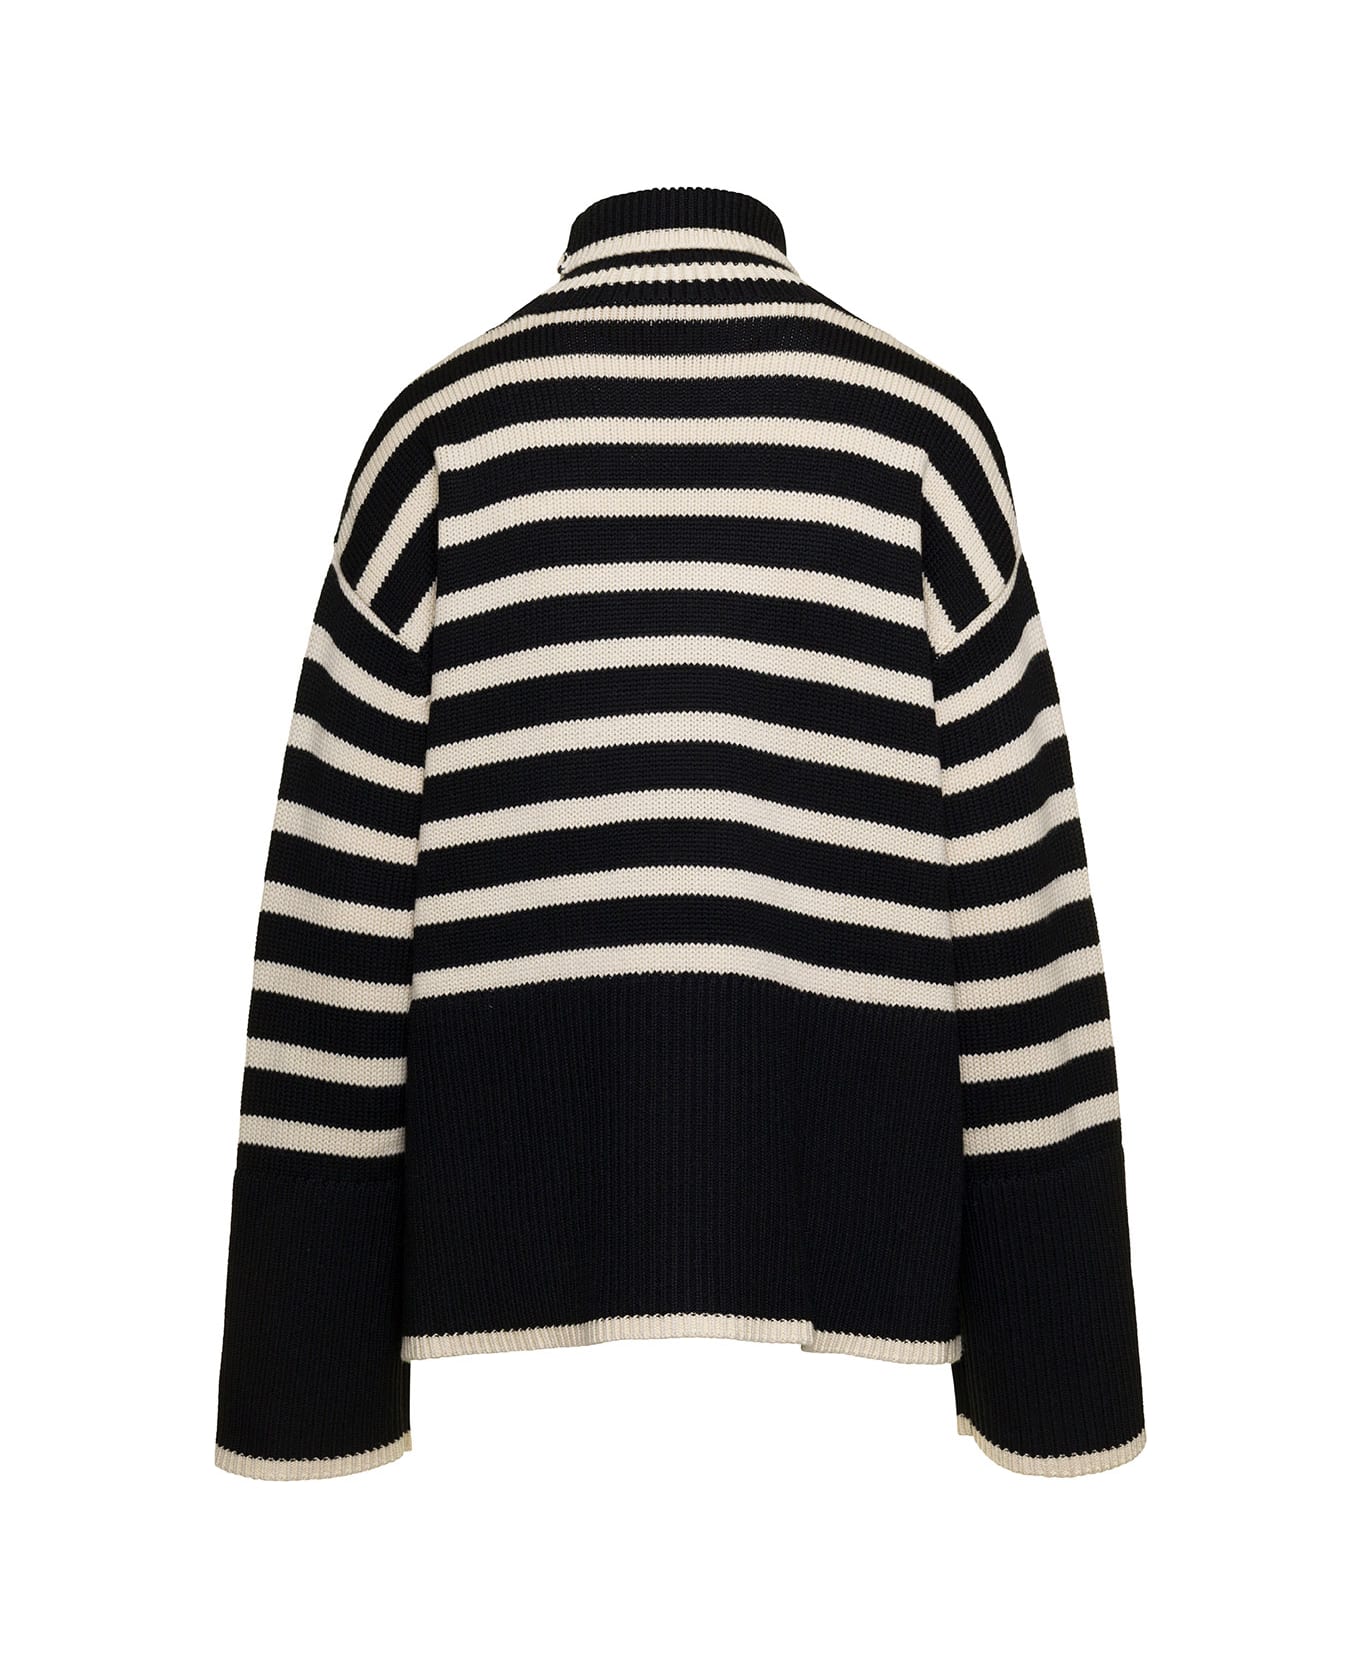 Totême Black And White Sweater With Striped Motif In Wool Woman - Black ニットウェア